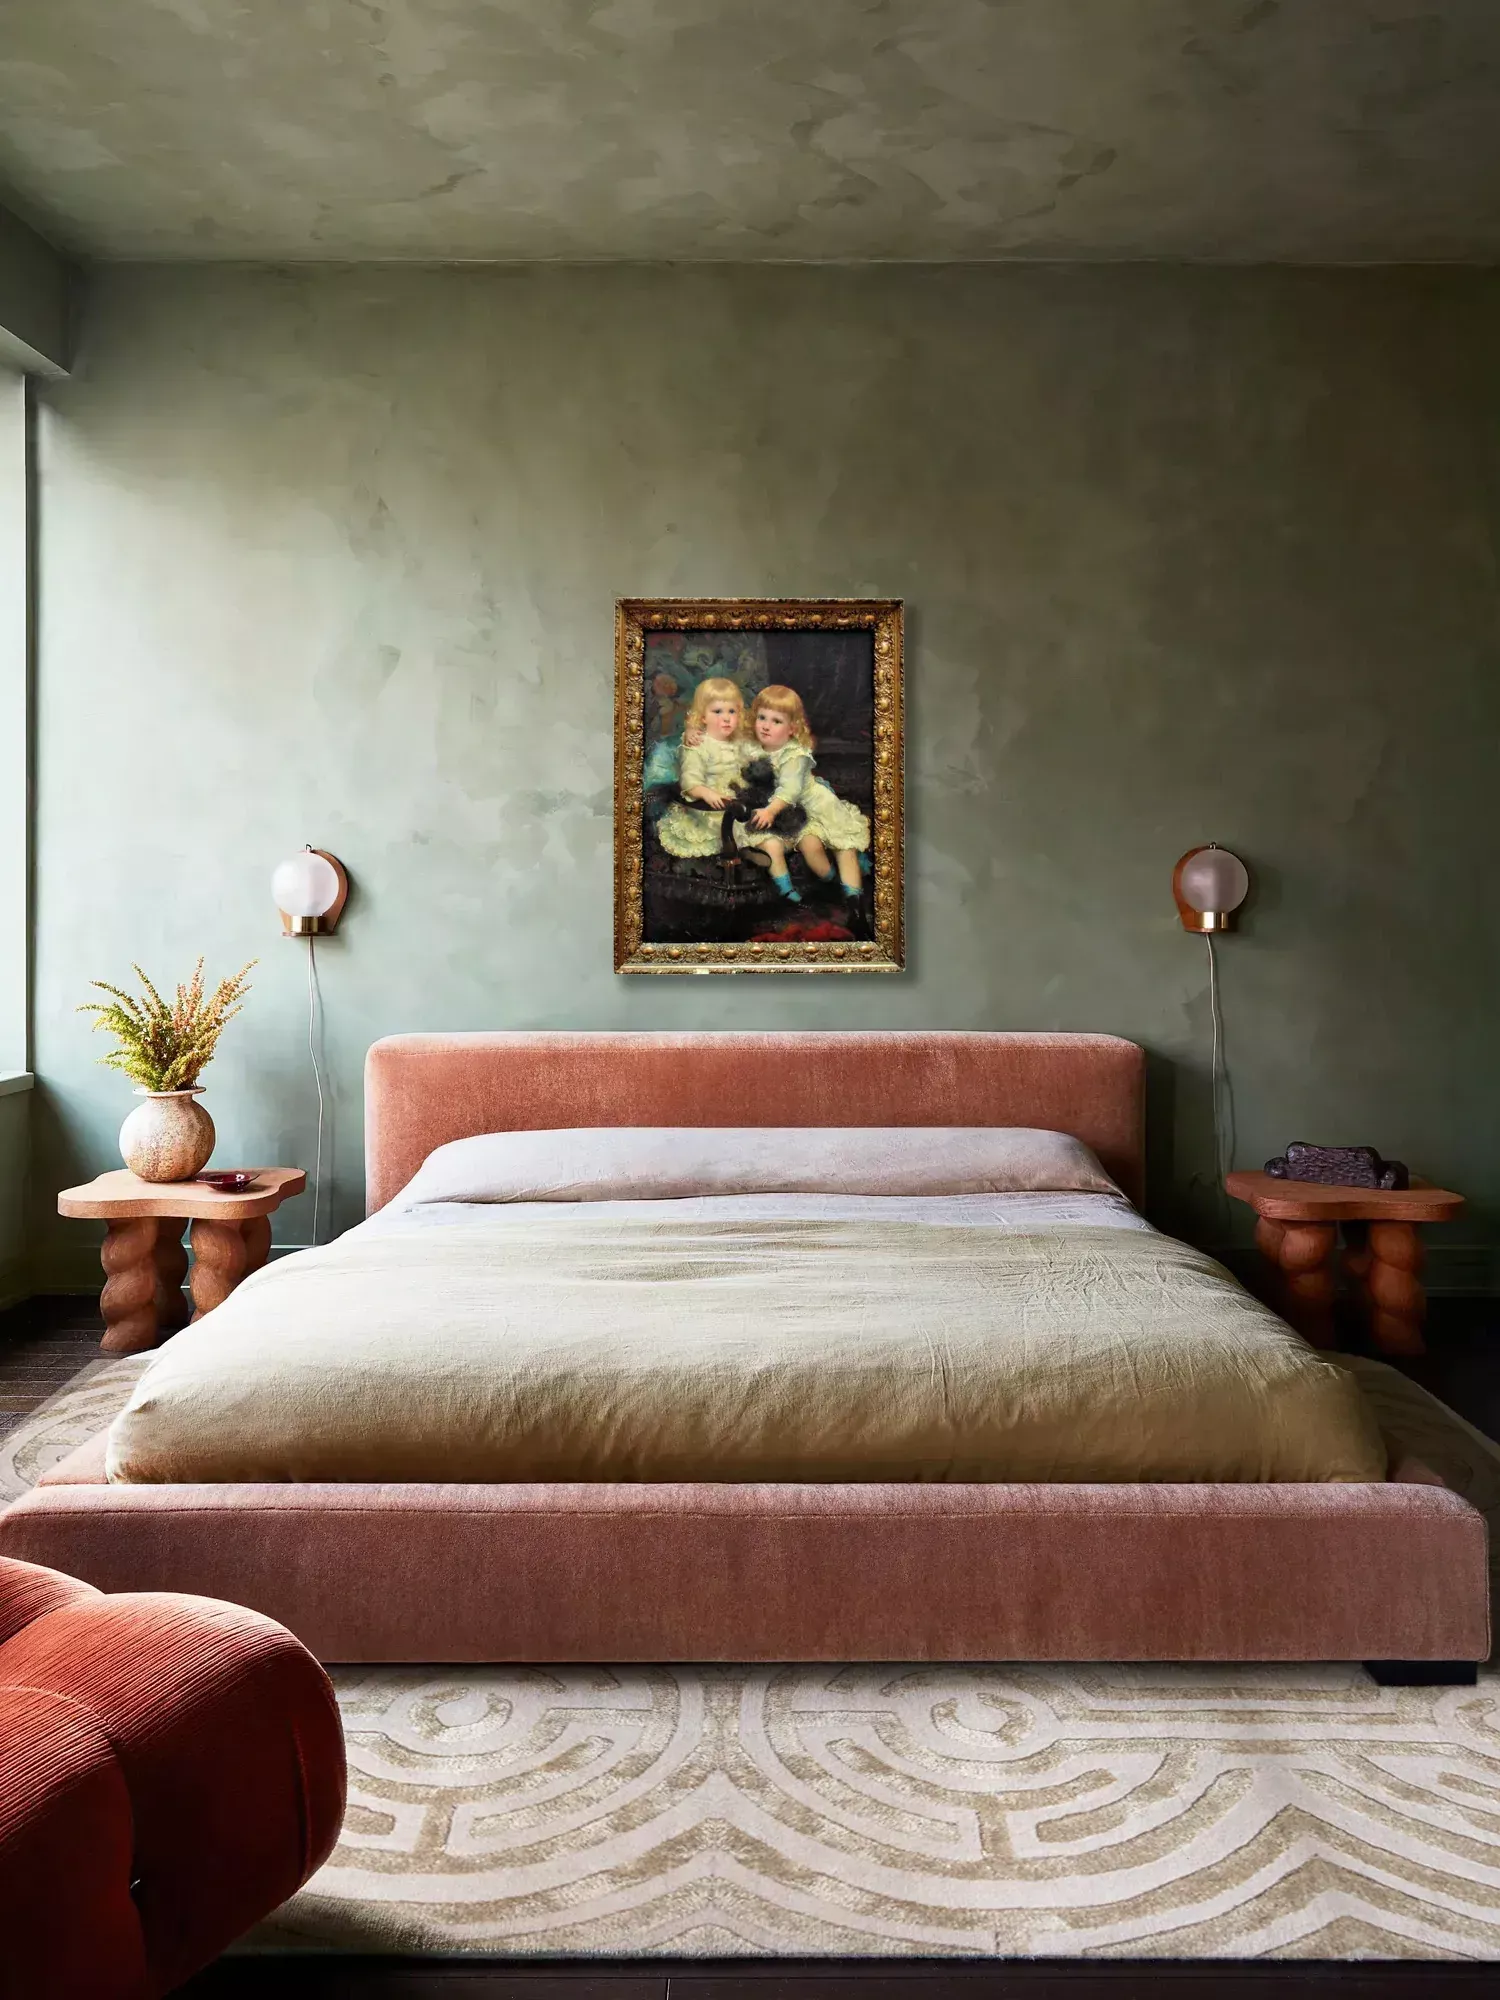 Dreaming of Antique Charm: Bed Designs That Add Vintage Flair to Your Bedroom